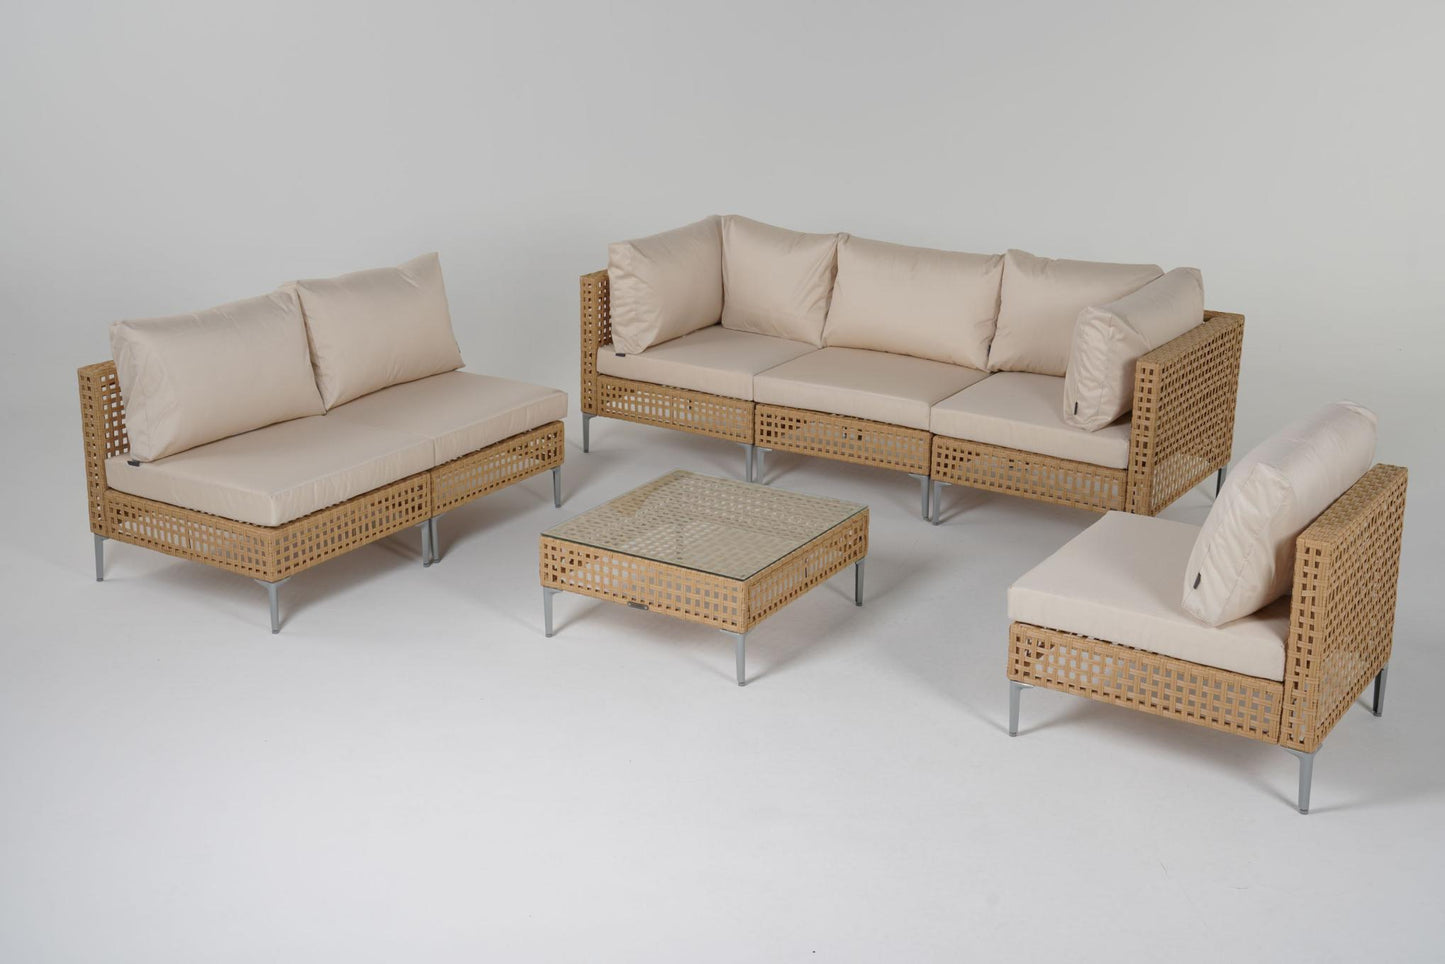 7 Pieces Patio Conversation Set, Outdoor Sectional Wicker Sofa Rattan Furniture Set with Coffee Table